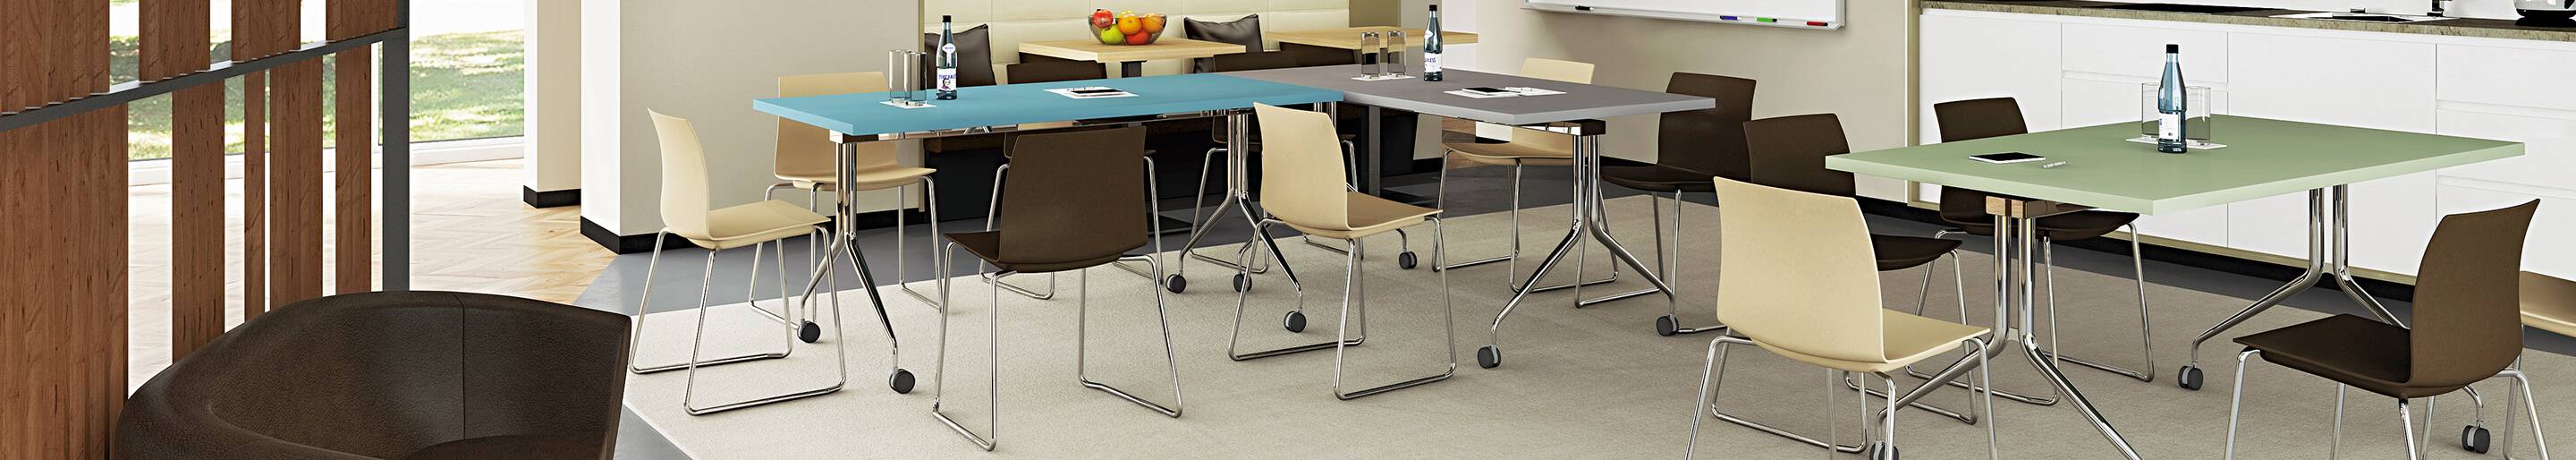 Indoor Seminar & Conference tables for your restaurant or hotel